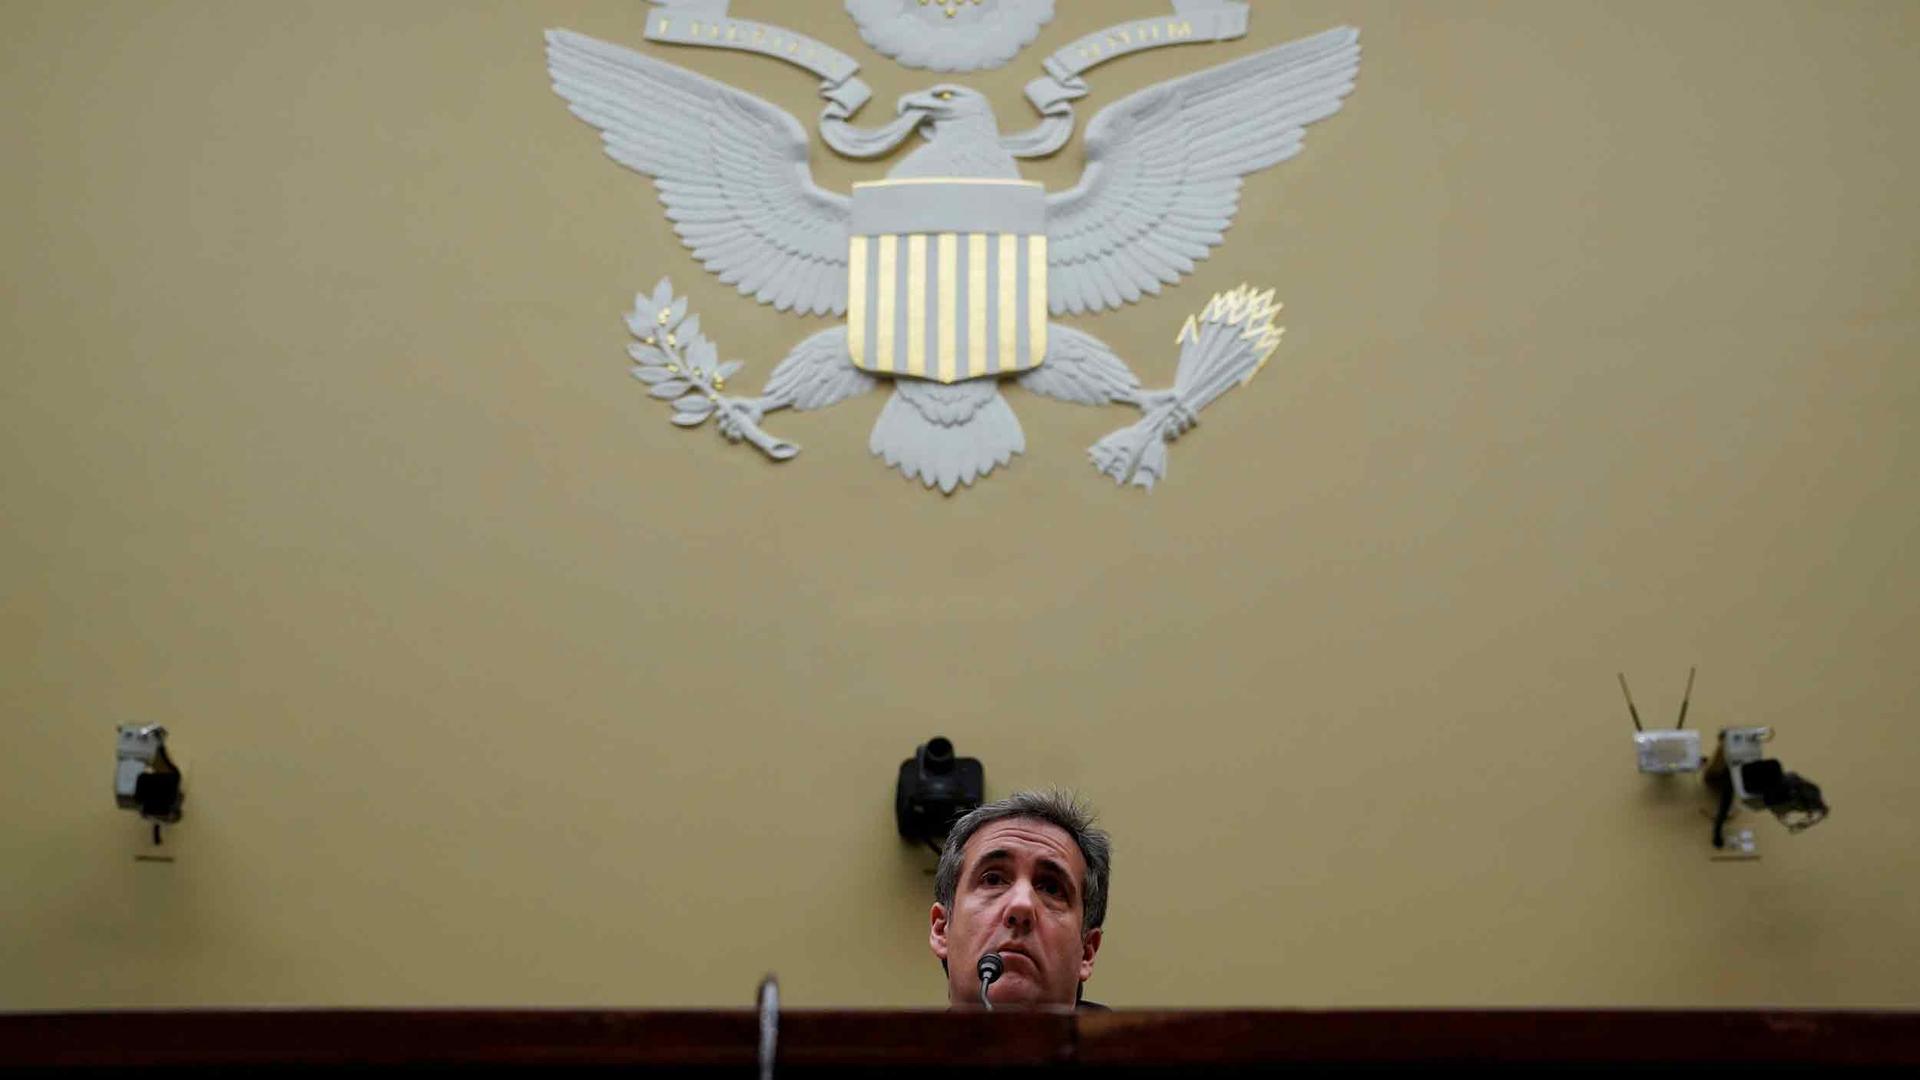 Michael Cohen, Trump's personal lawyer, sits in front of a microphone. Overhead is the US eagle seal. 